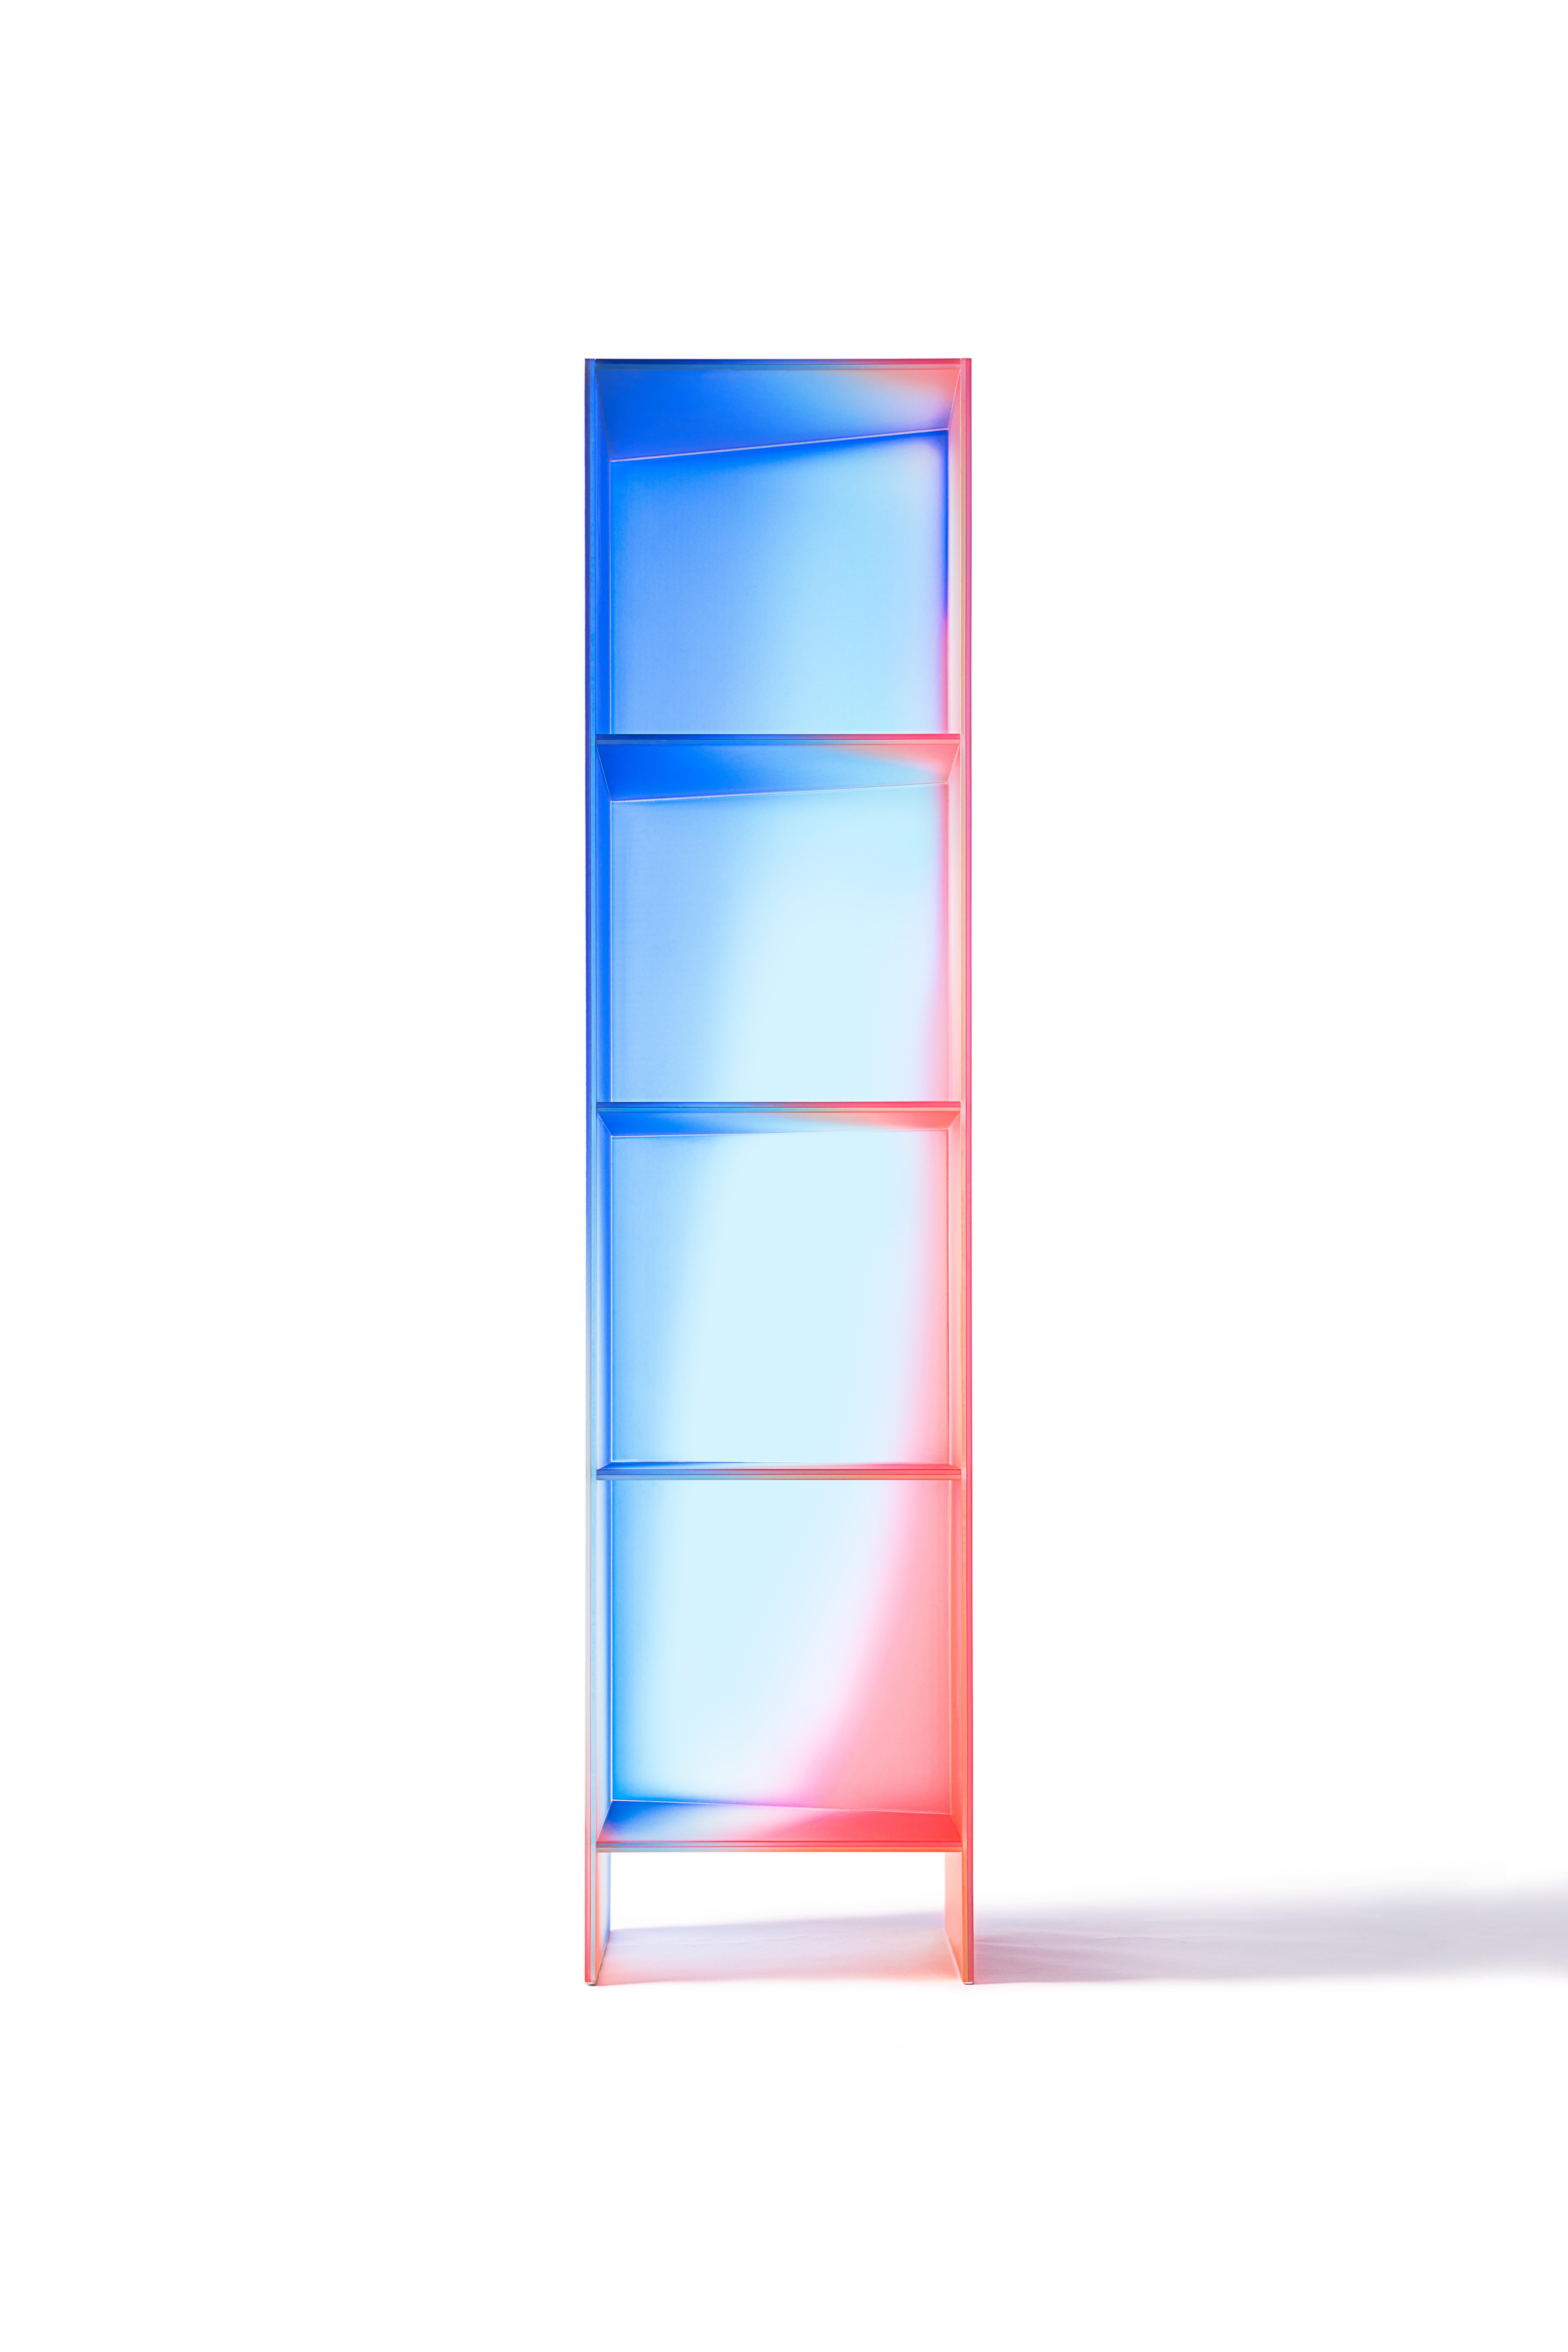 'HALO' collection by Buzao - bookcase or shelves
Laminated dichroic glass, gradient colors
Measures: 42 x 40 x H 180 cm

Studio Buzao from Guangzhou (China) is exploring innovation with furniture and lighting design. From marble to lava stone,